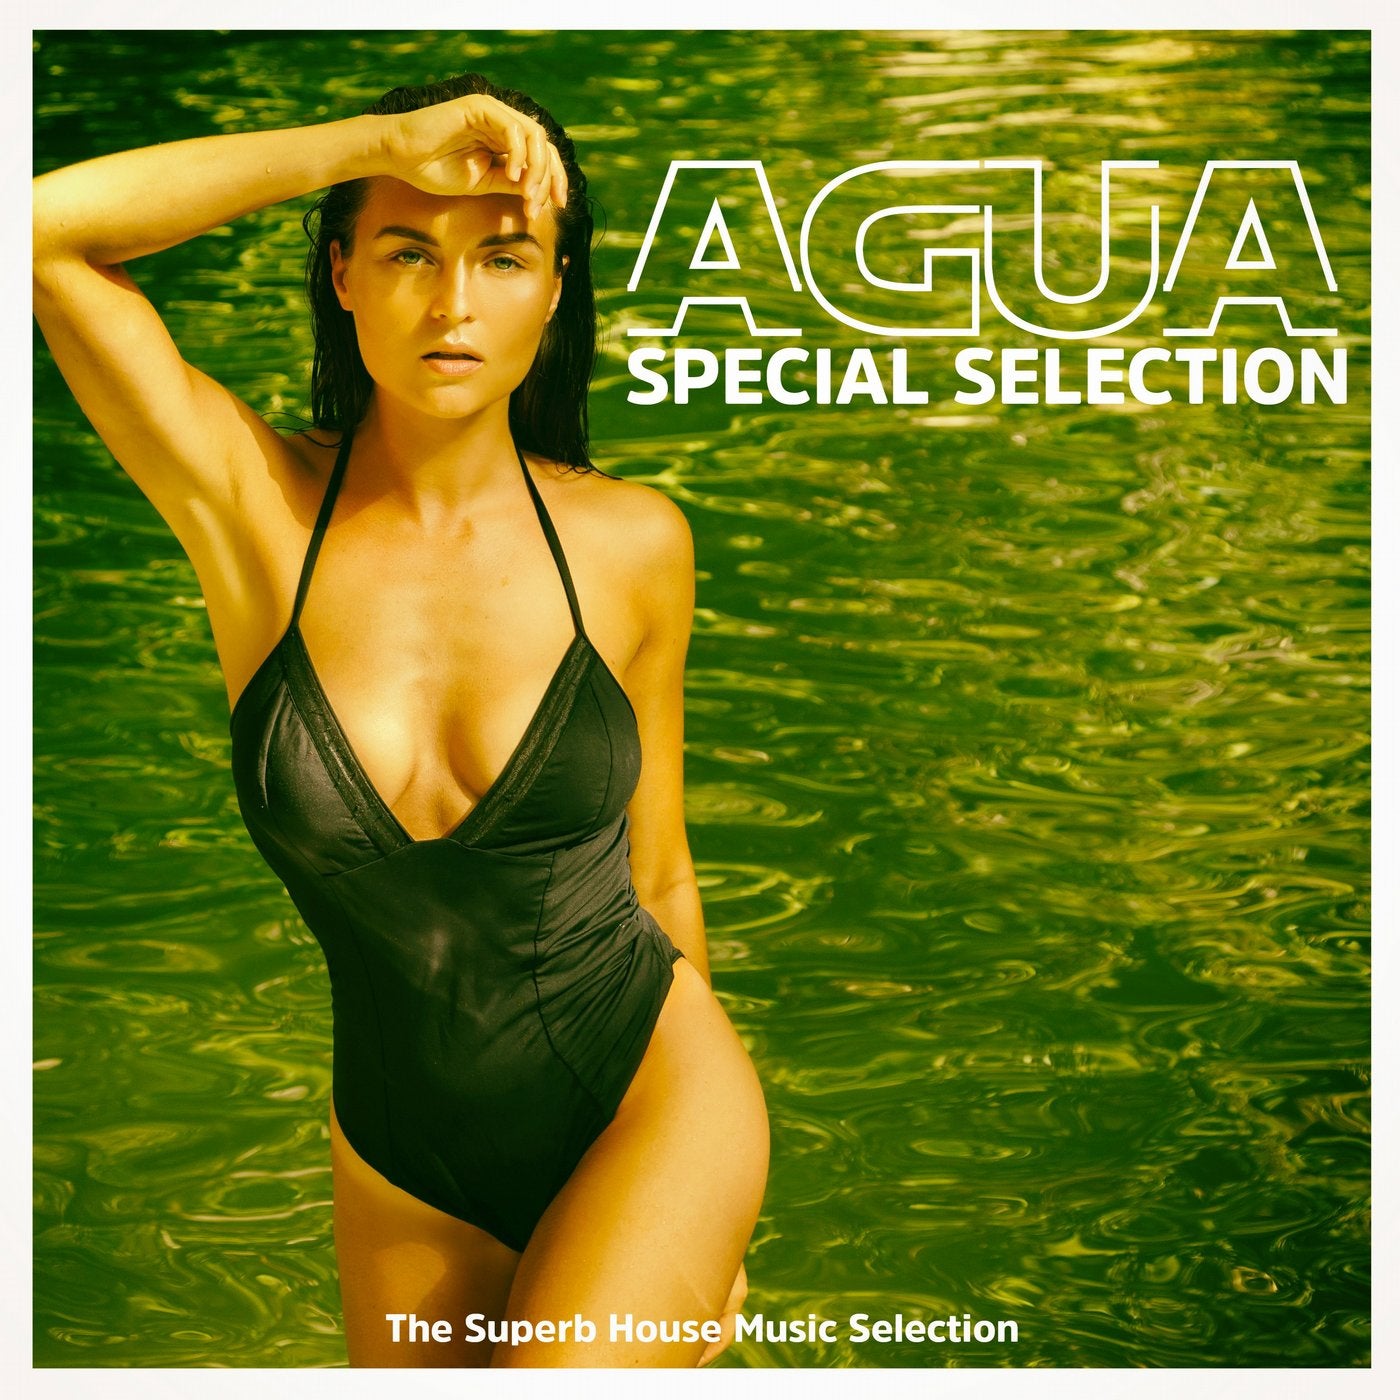 Agua (The Superb House Music Selection)